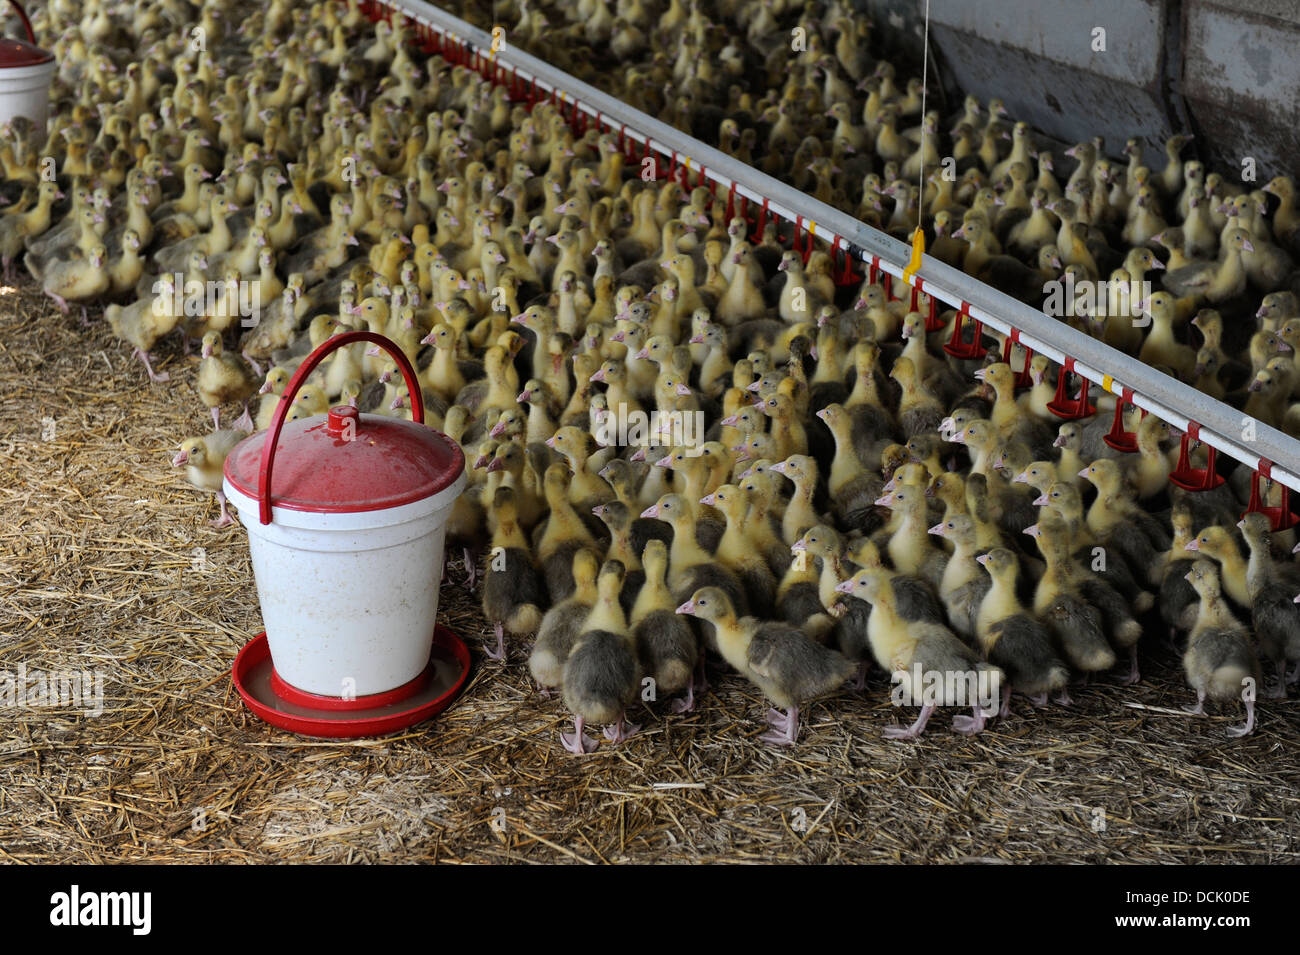 GERMANY, Saxonia, Wermsdorf, geese breeding for meat and down production, Gosling, young Geese in stable Stock Photo